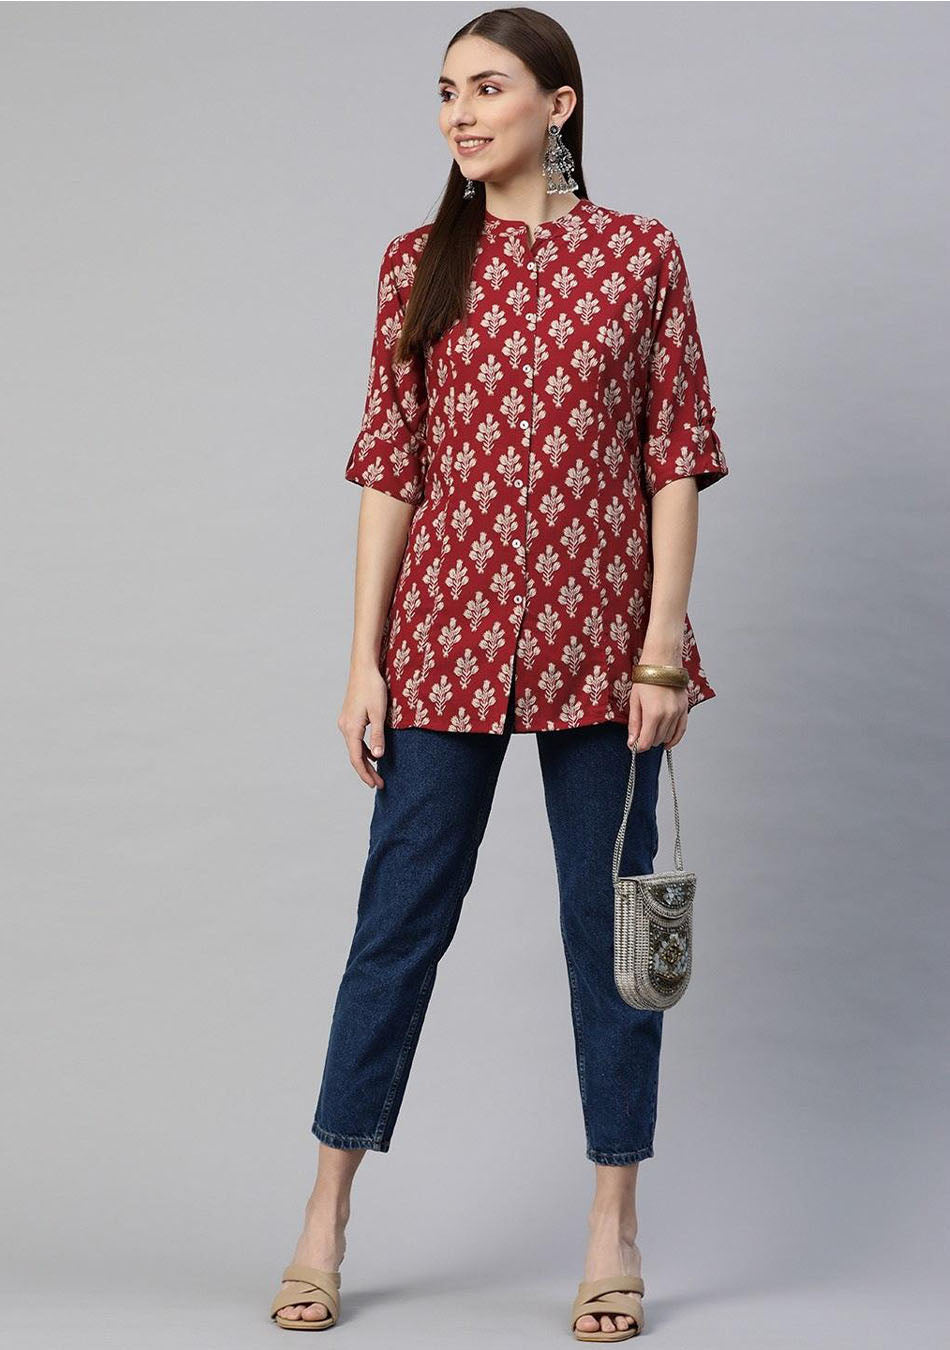 Dark Maroon Floral Rayon A-line Shirts Style Top